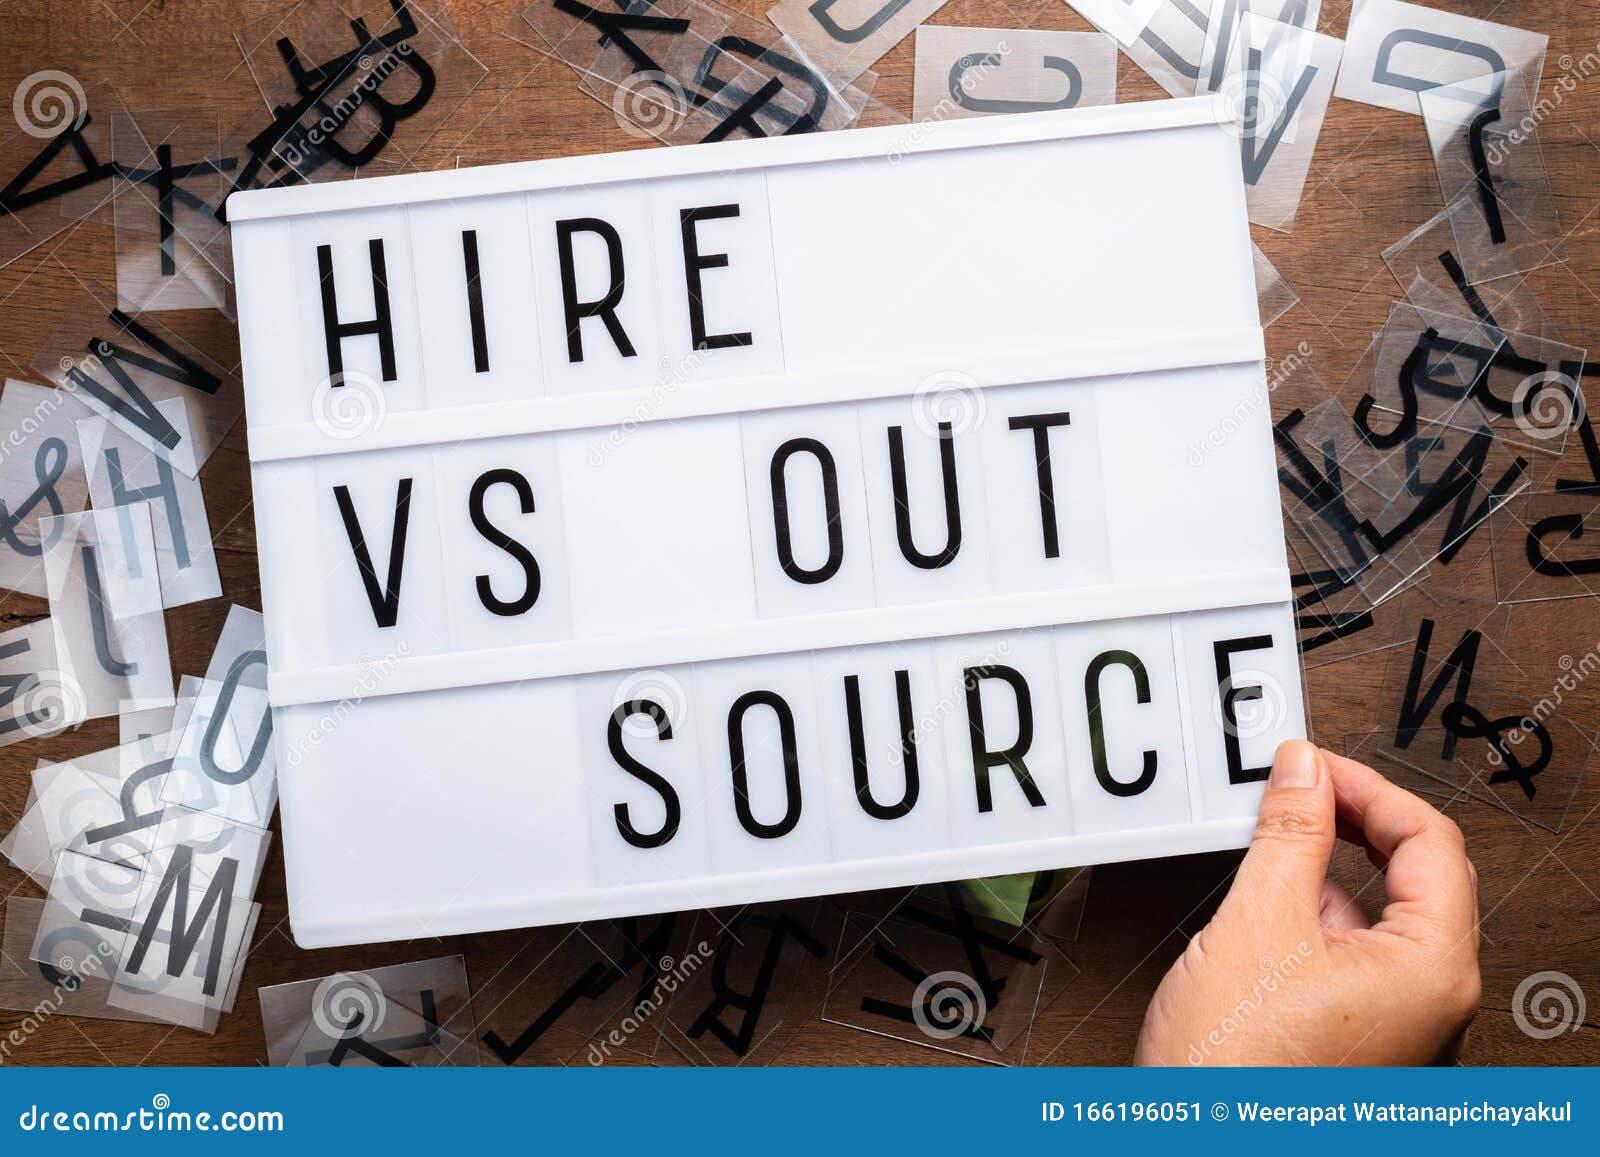 hire versus outsource